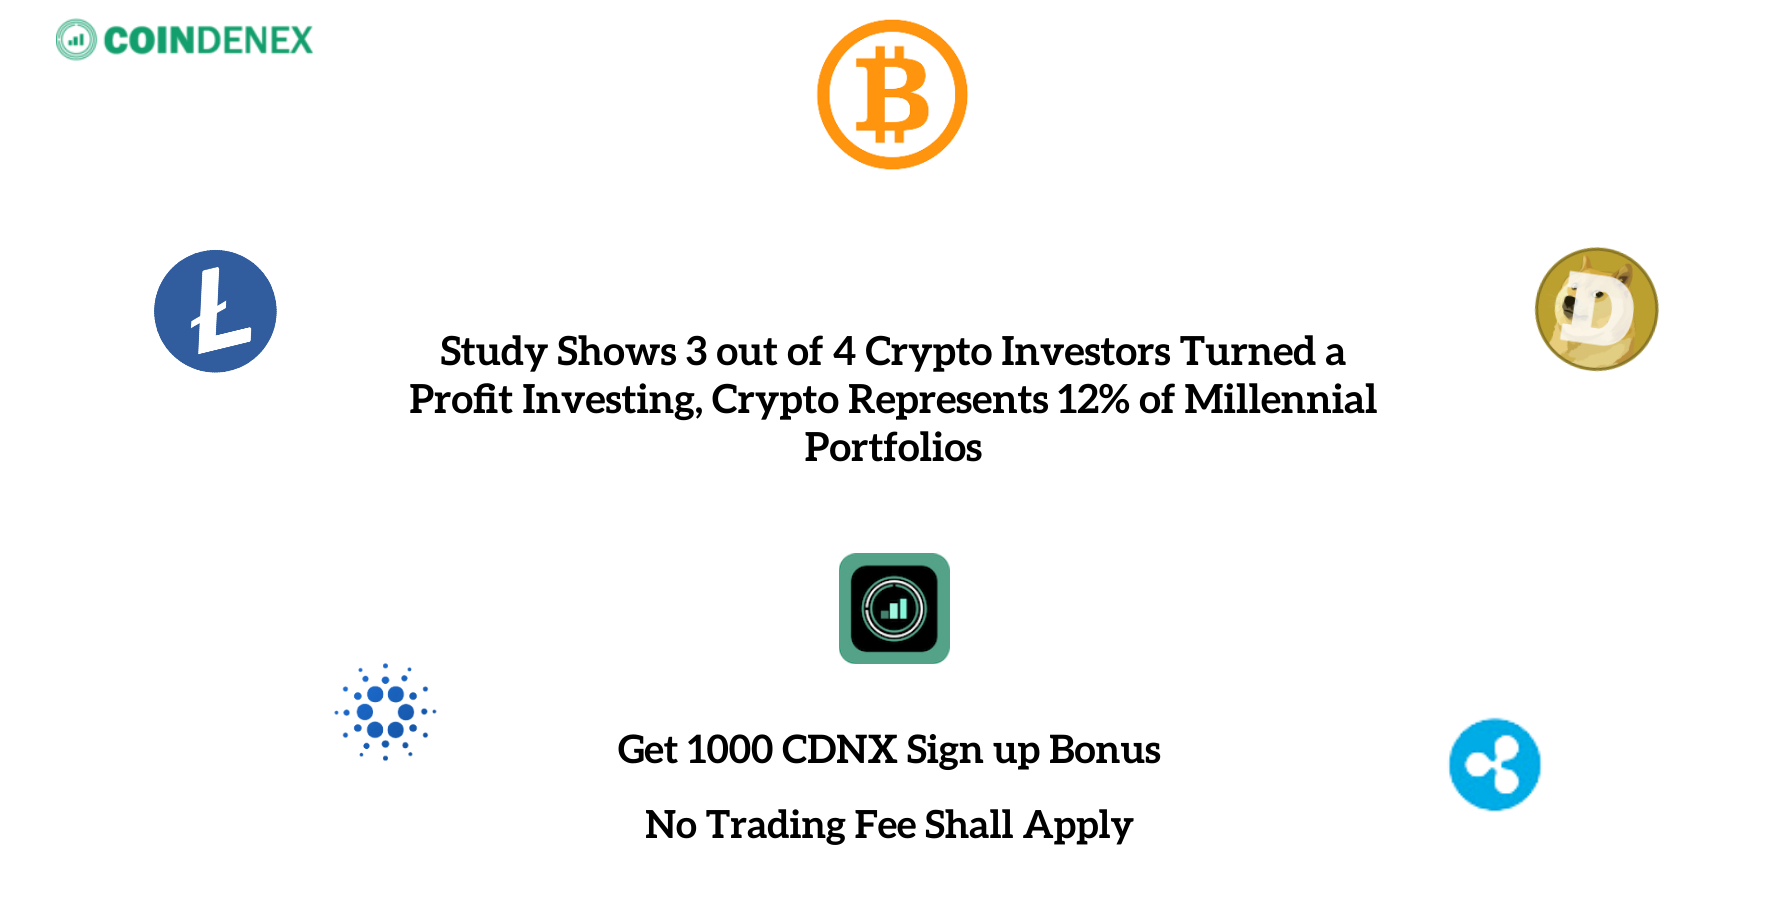 Study Shows 3 out of 4 Crypto Investors Turned a Profit Investing, Crypto Represents 12% of Millennial Portfolios